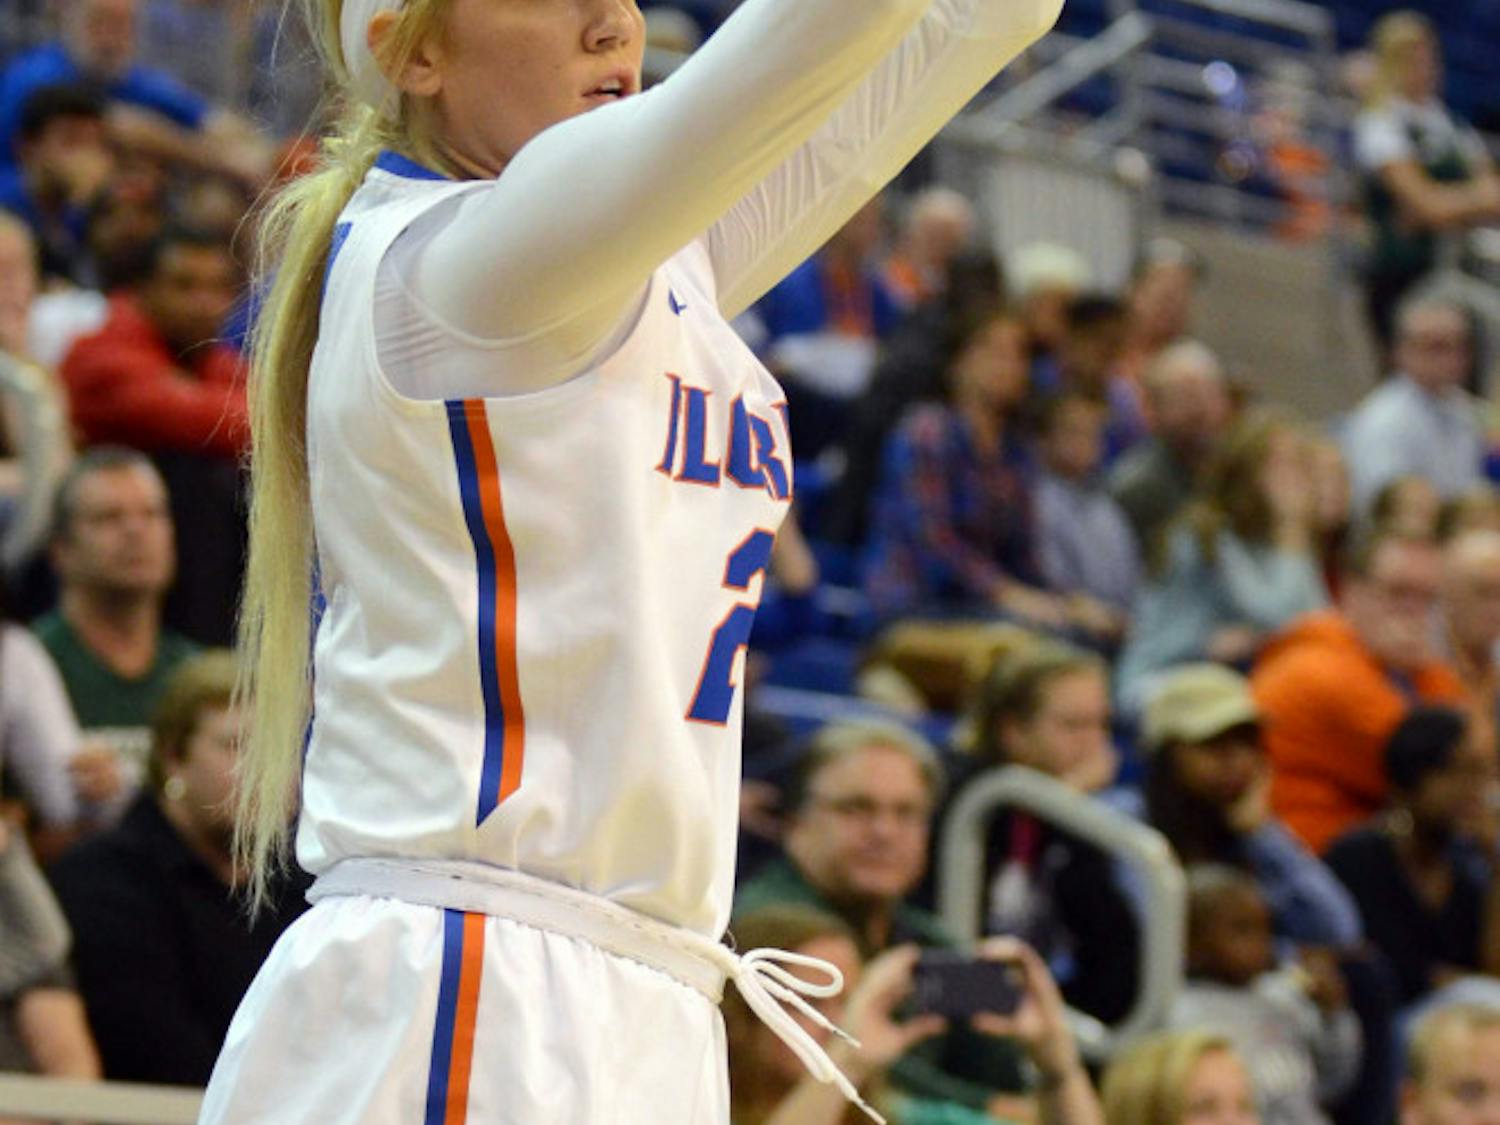 Brooke Copeland attempts a three-point shot during Florida's win against Stetson.